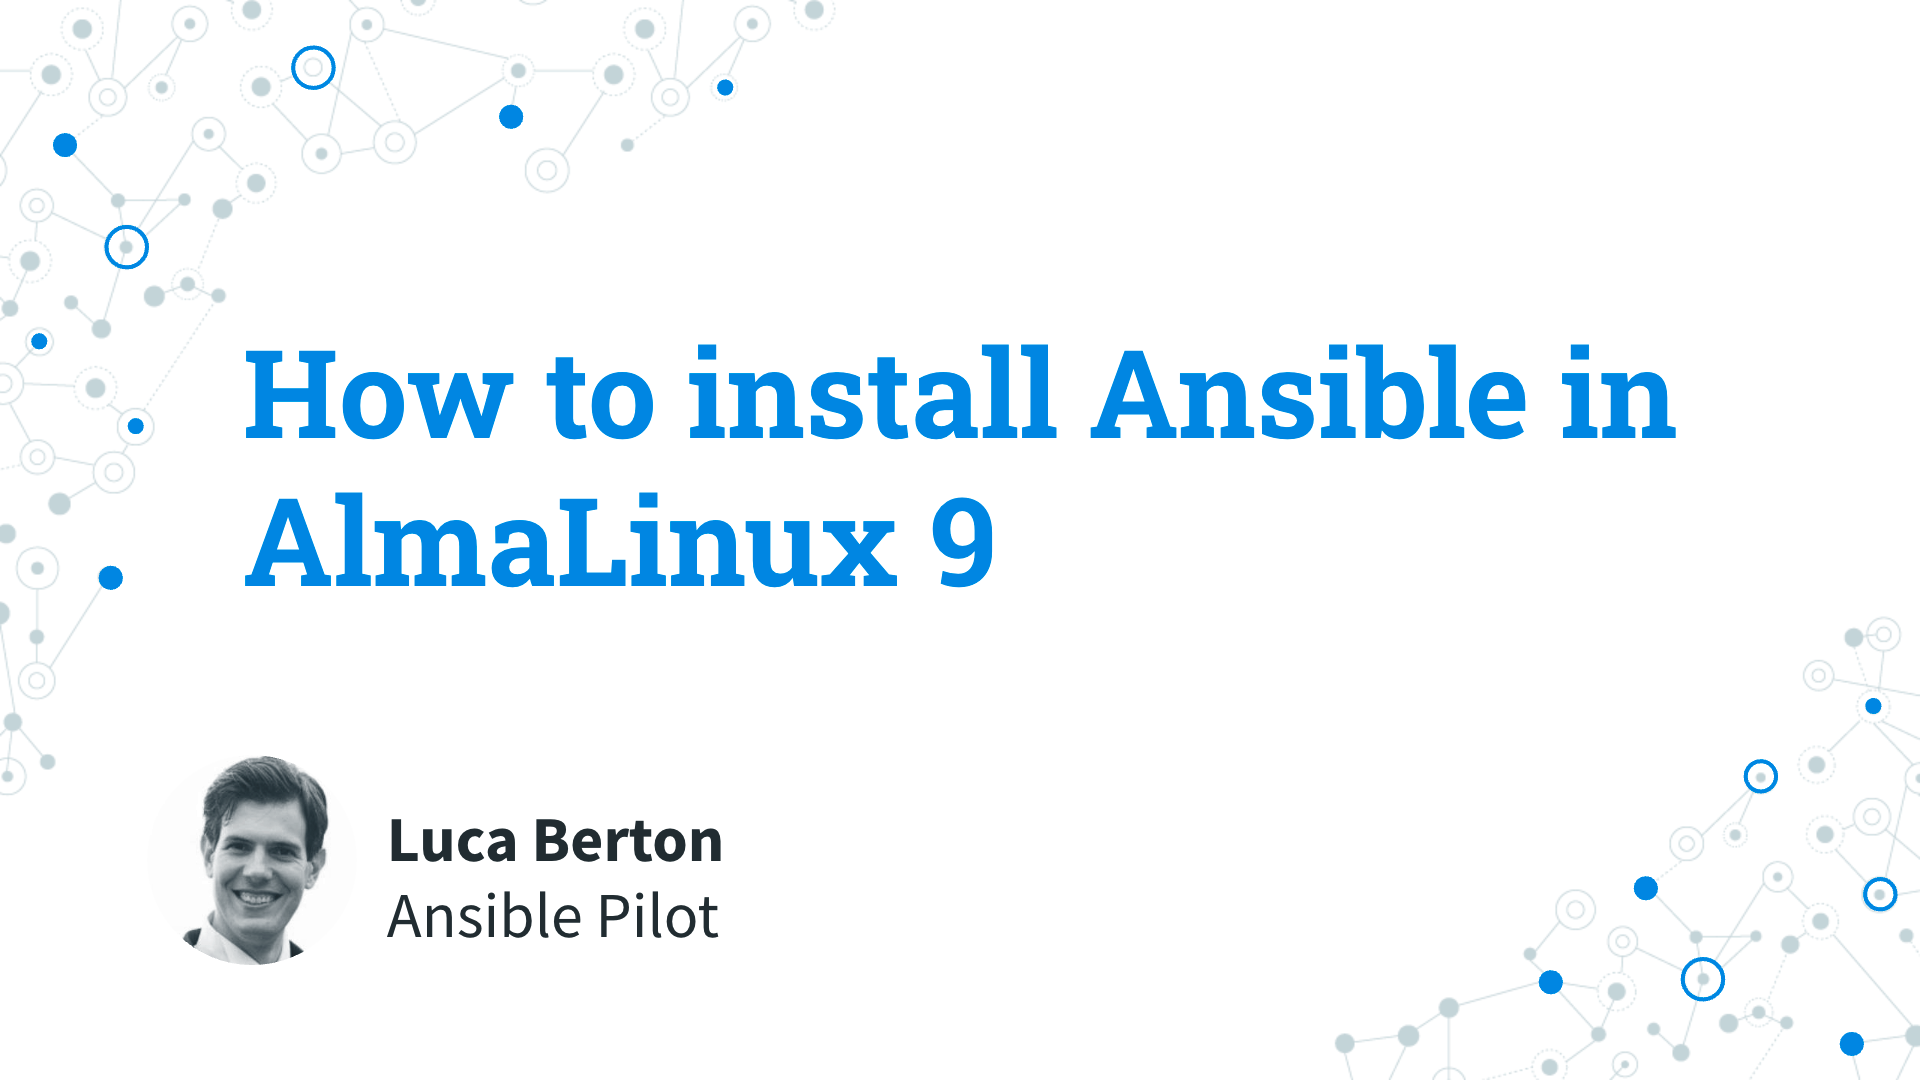 How to install Ansible in AlmaLinux 9 - Ansible install